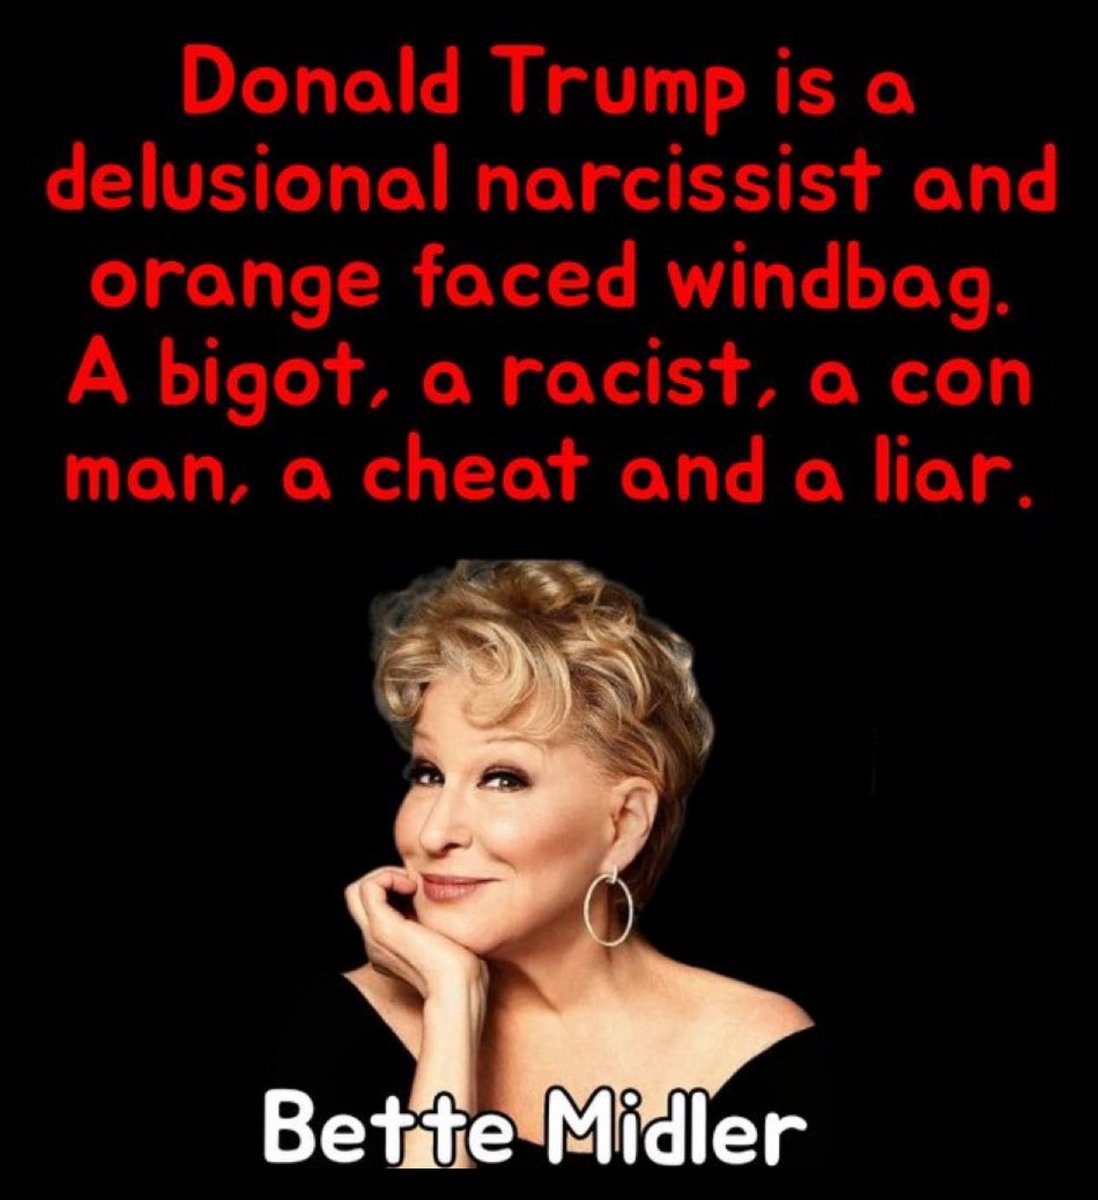 Who agrees with Bette Midler? 🙋🏽‍♀️🙋🏽🙋🏽‍♂️